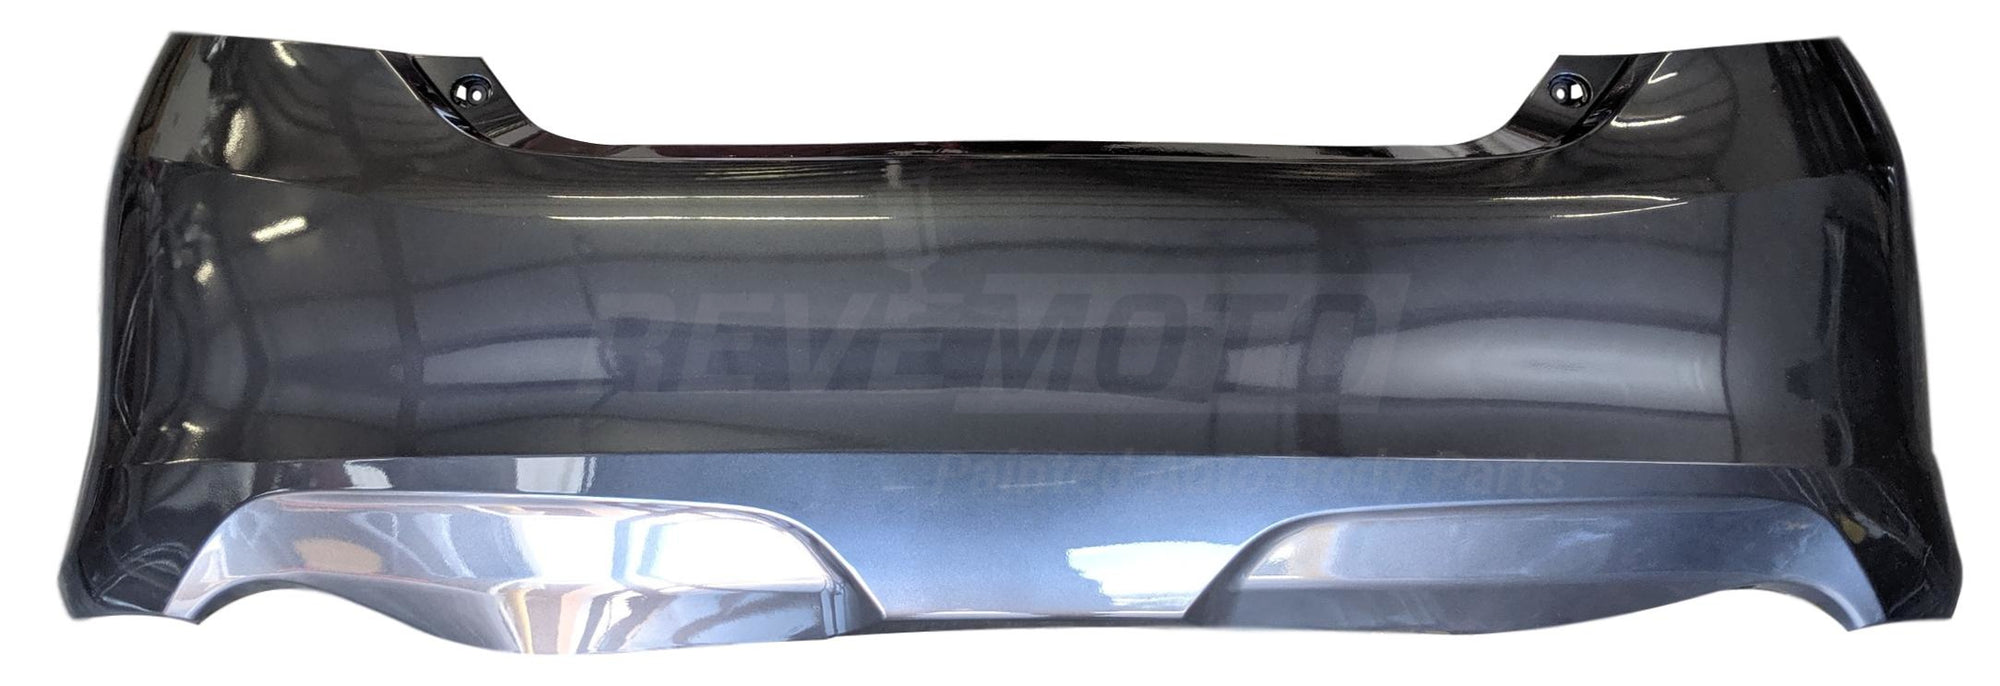 2014 Toyota Camry Rear Bumper Cover, SE ,SE Sport Models; Made of Plastic, Painted Magnetic Gray Metallic (1G3)